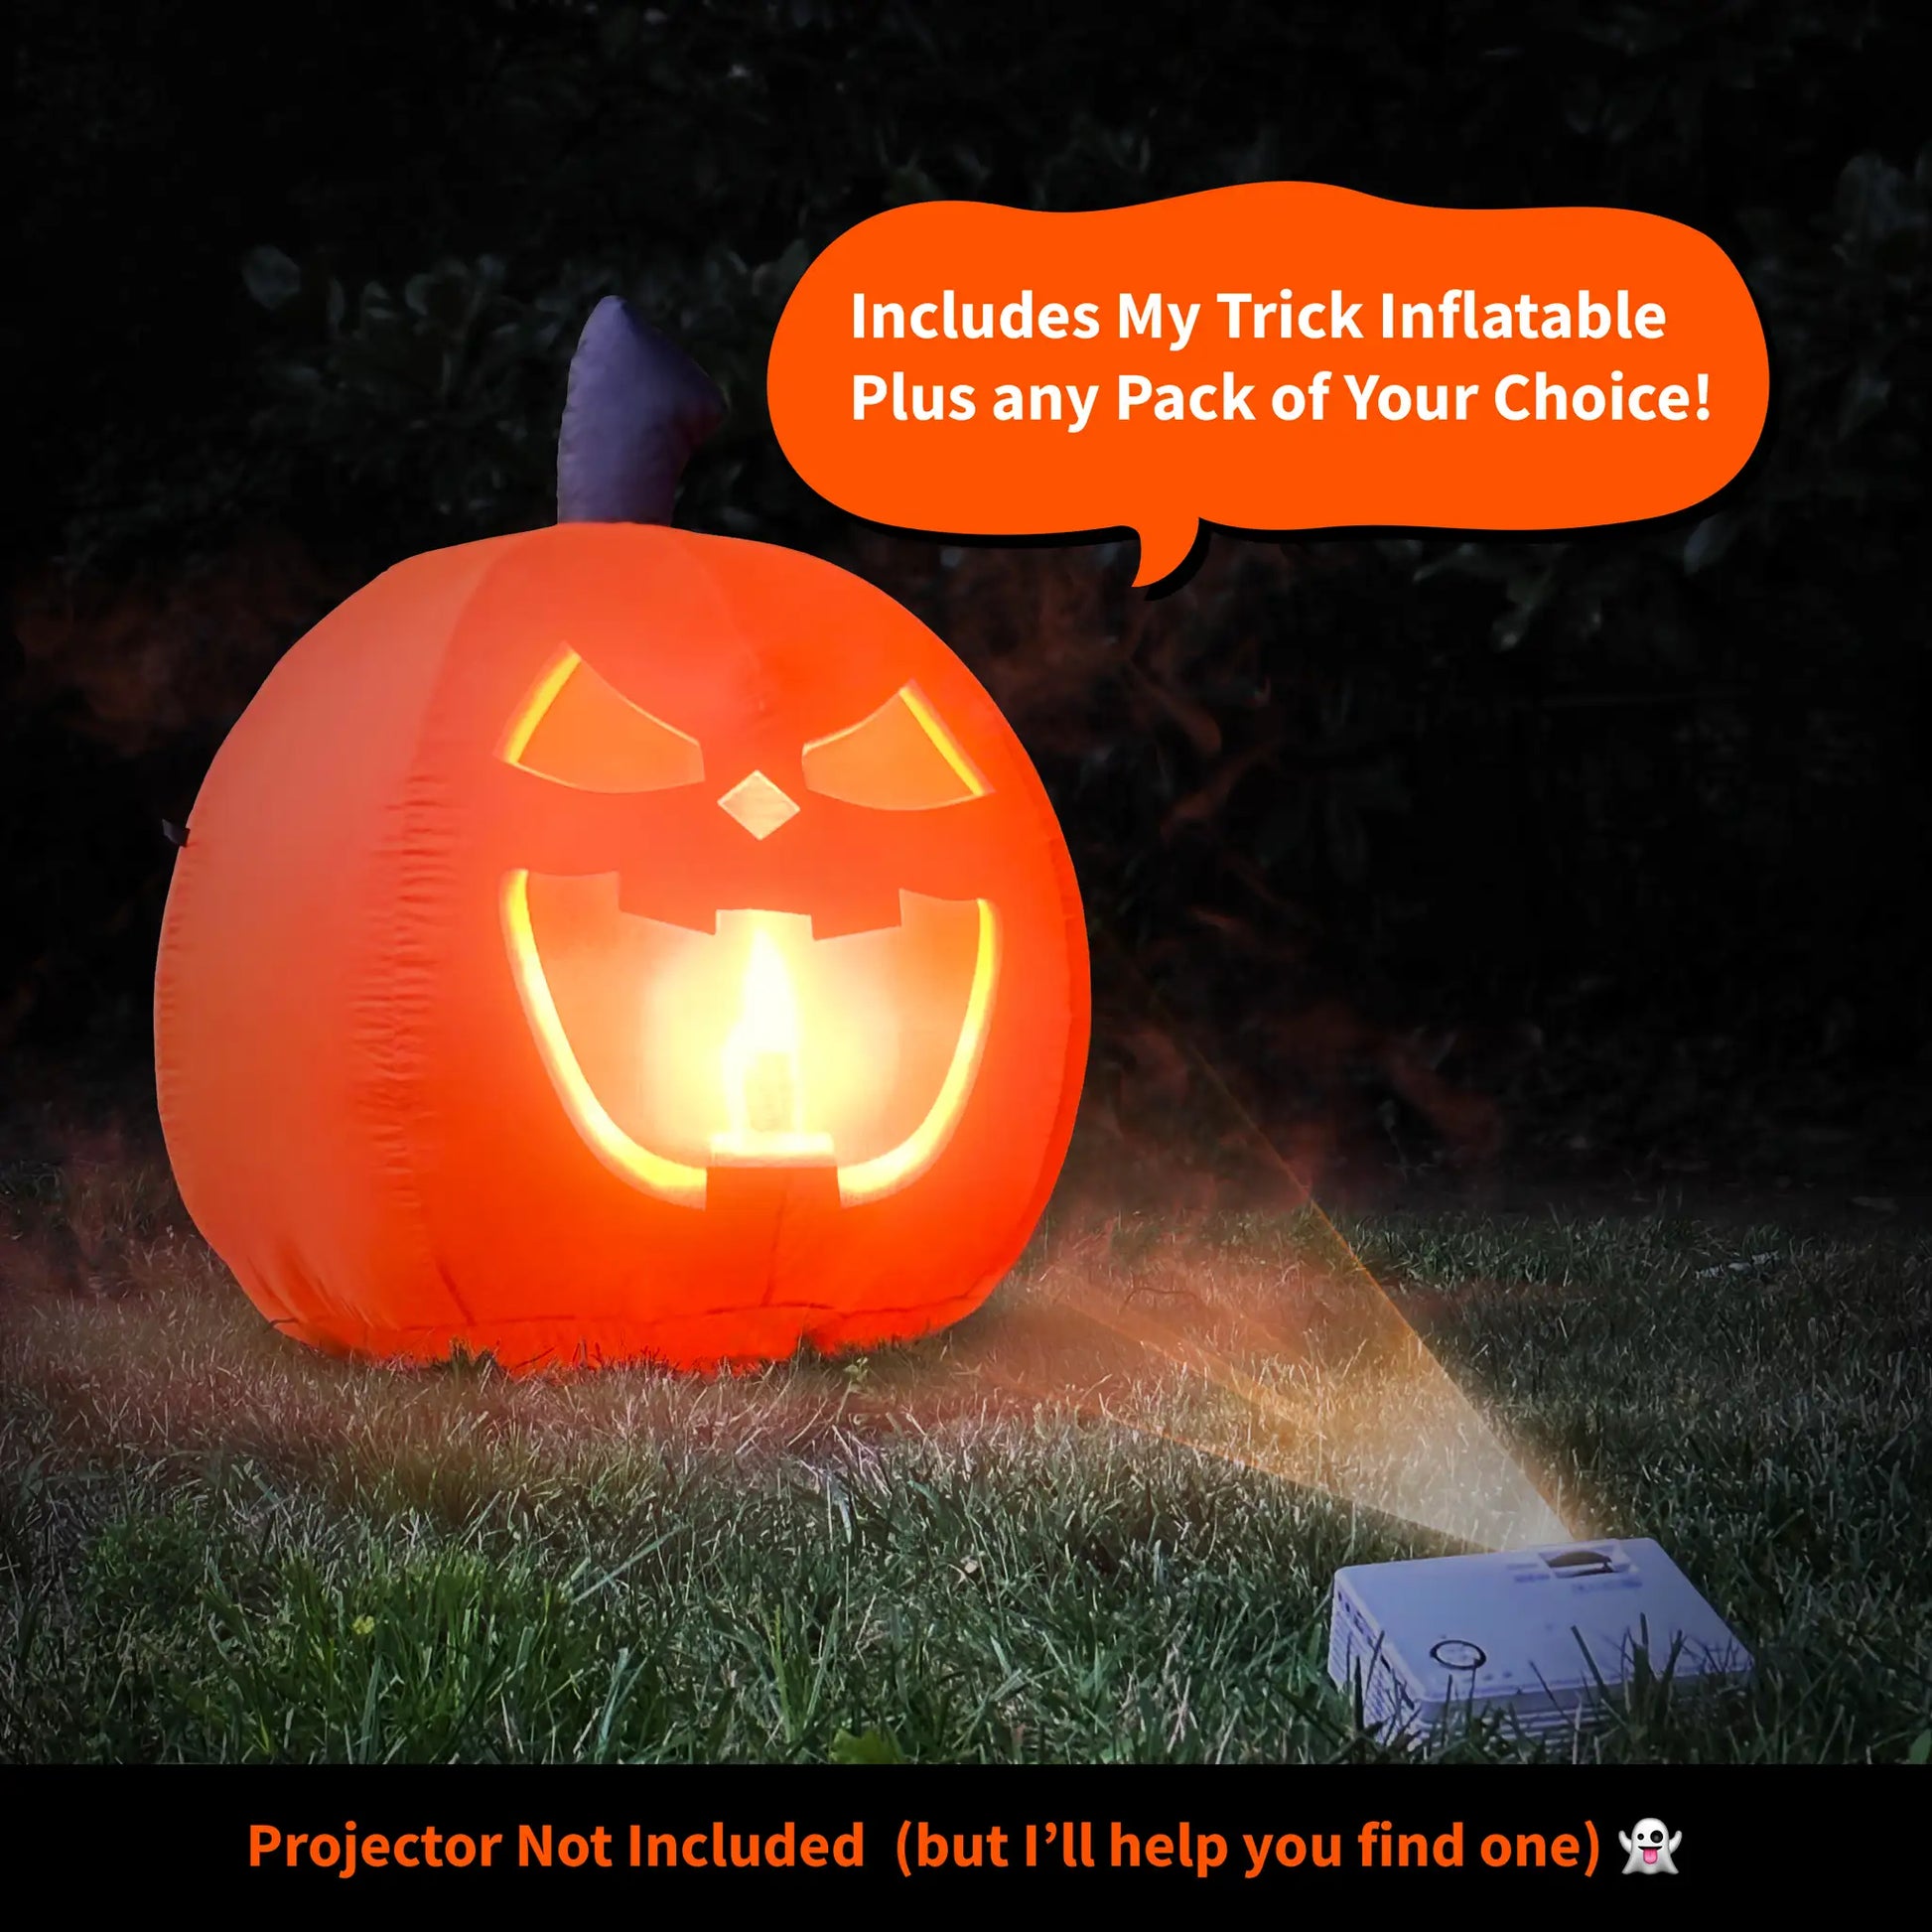 Trick Ghastly: The Giant Singing Inflatable Pumpkin